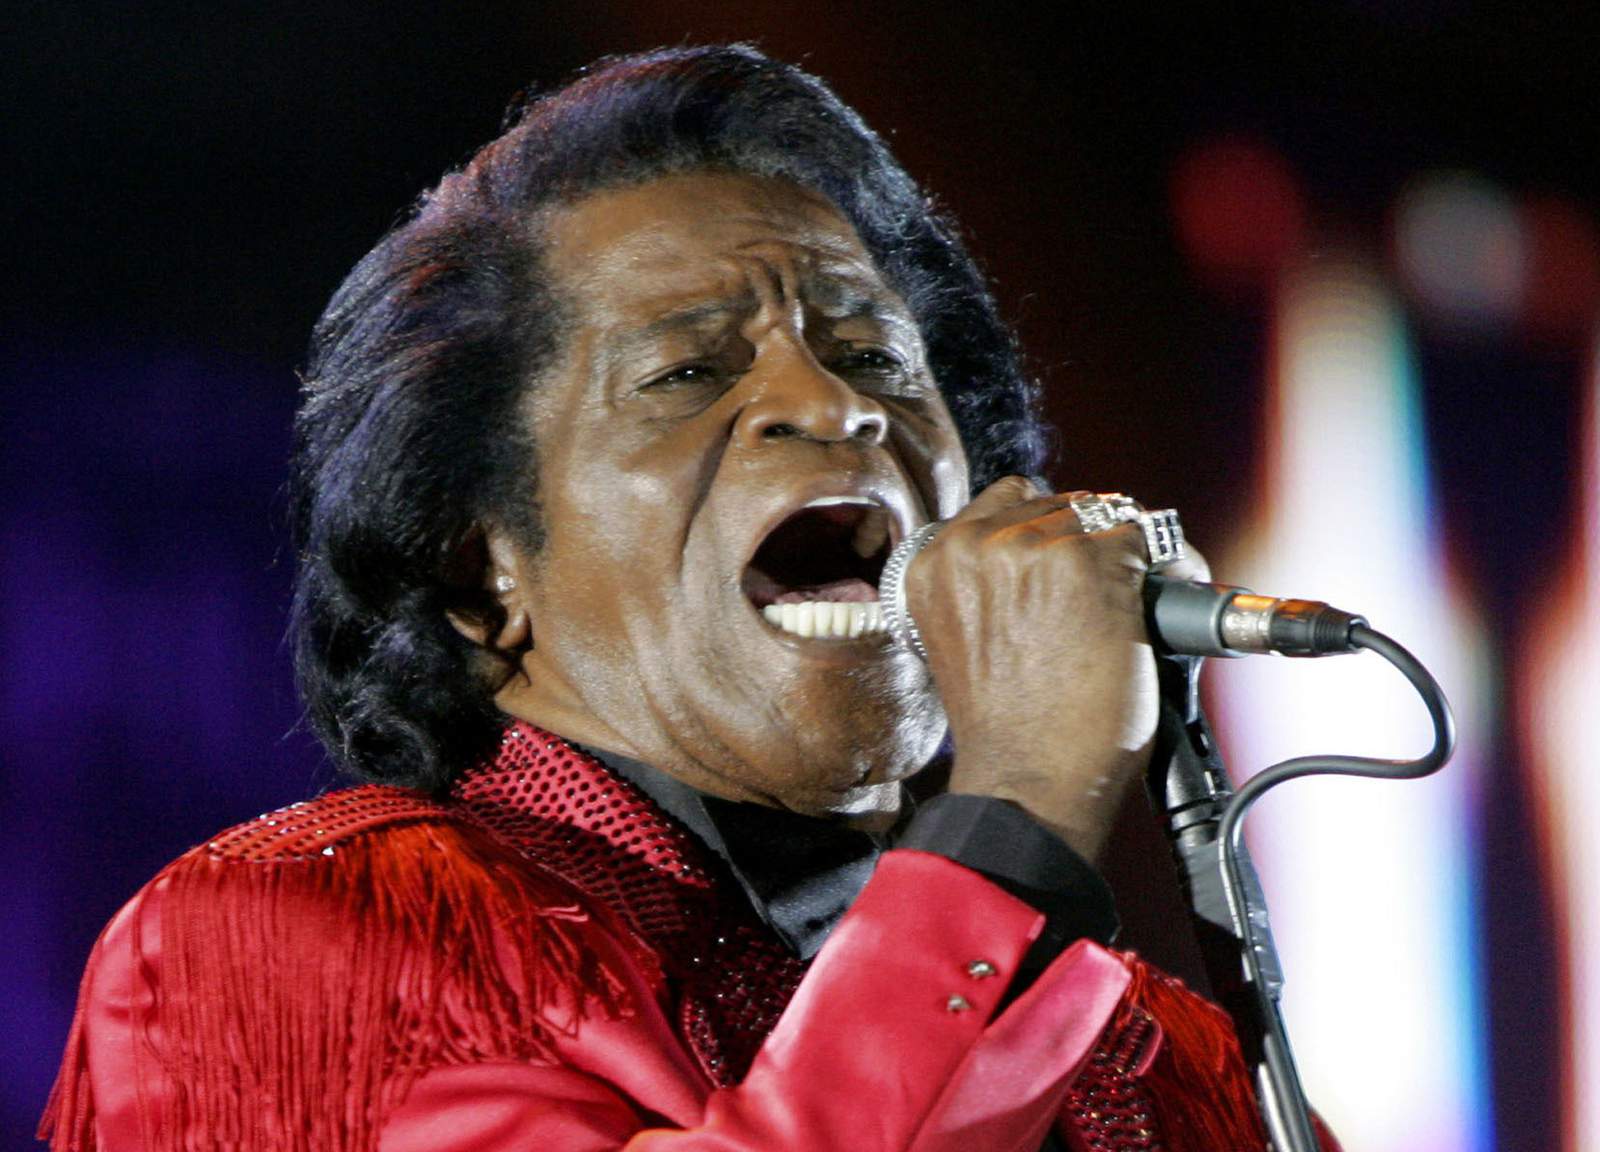 SC high court ruling may finally settle James Brown estate